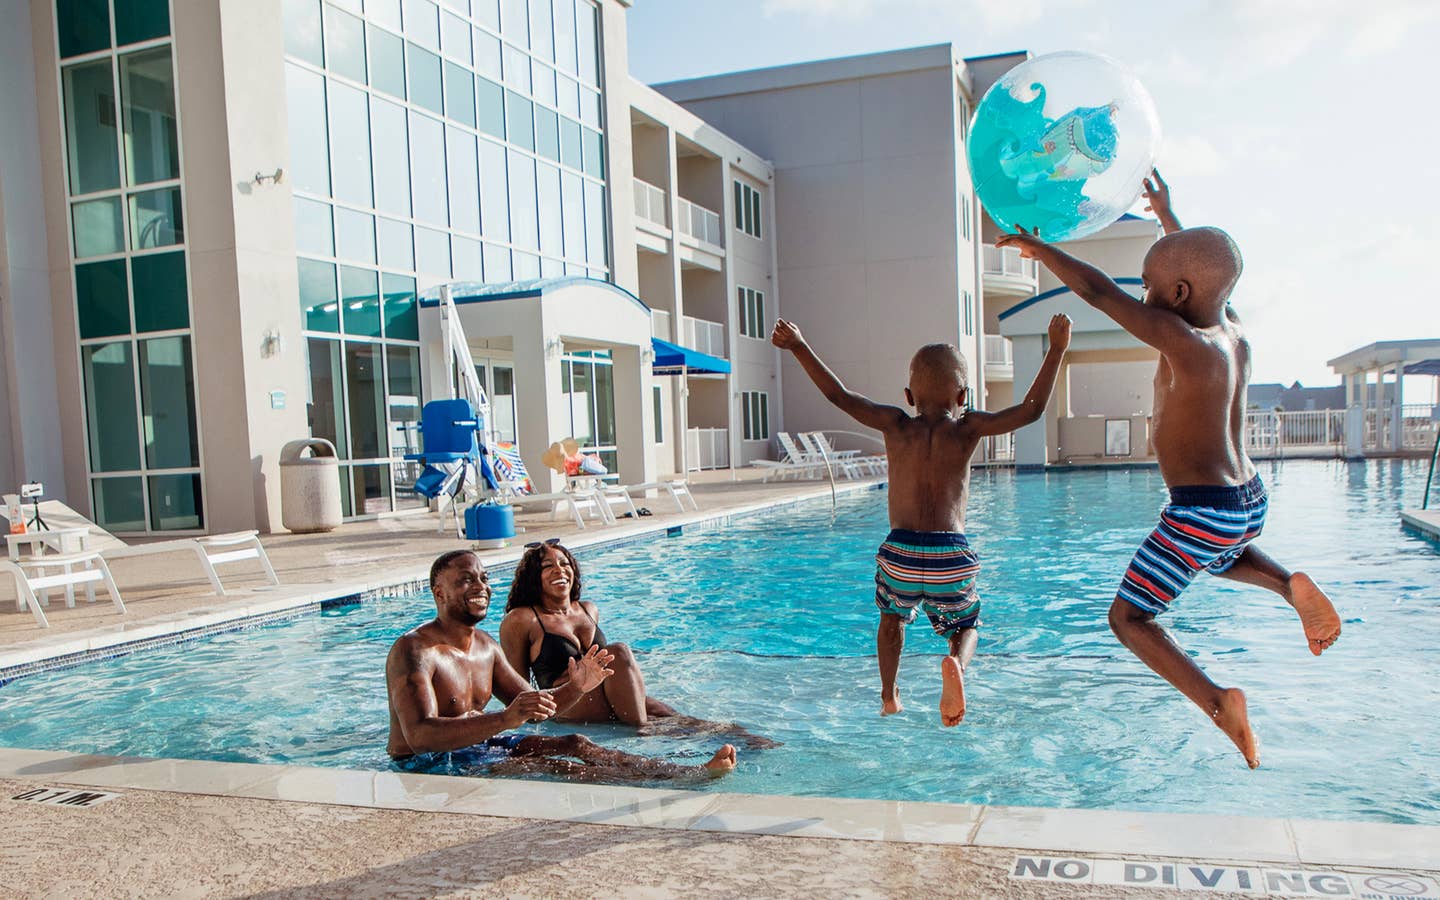 A woman, man and two young boys jump into an infinity pool near a beachfront with a beach ball.